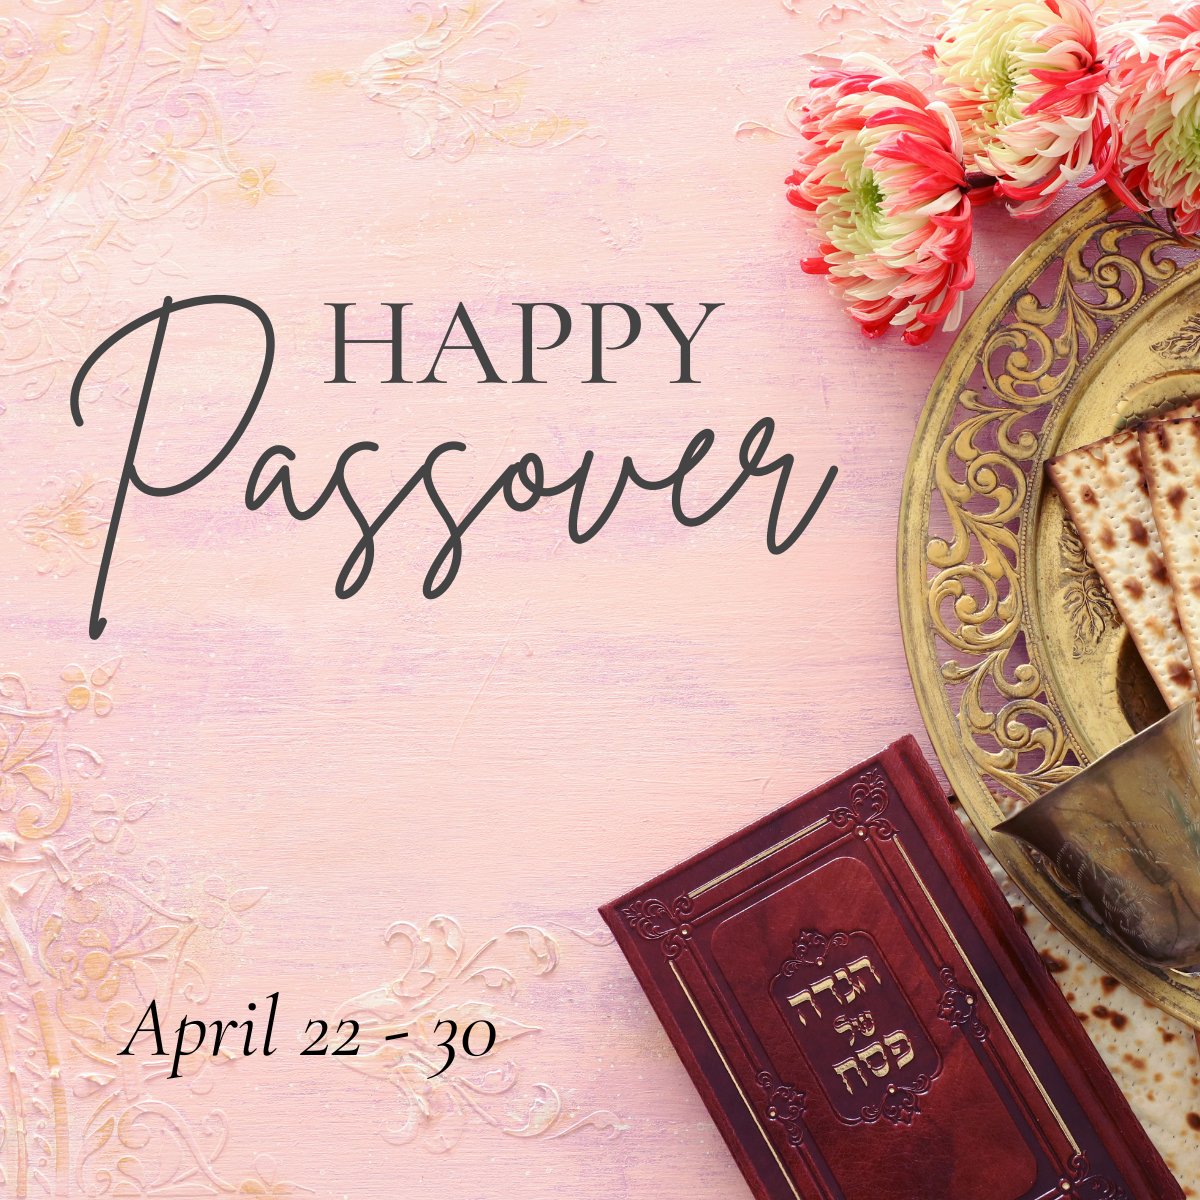 Happy Passover. May these festive days bring positivity and prosperity to you and your family. Chag Sameach!